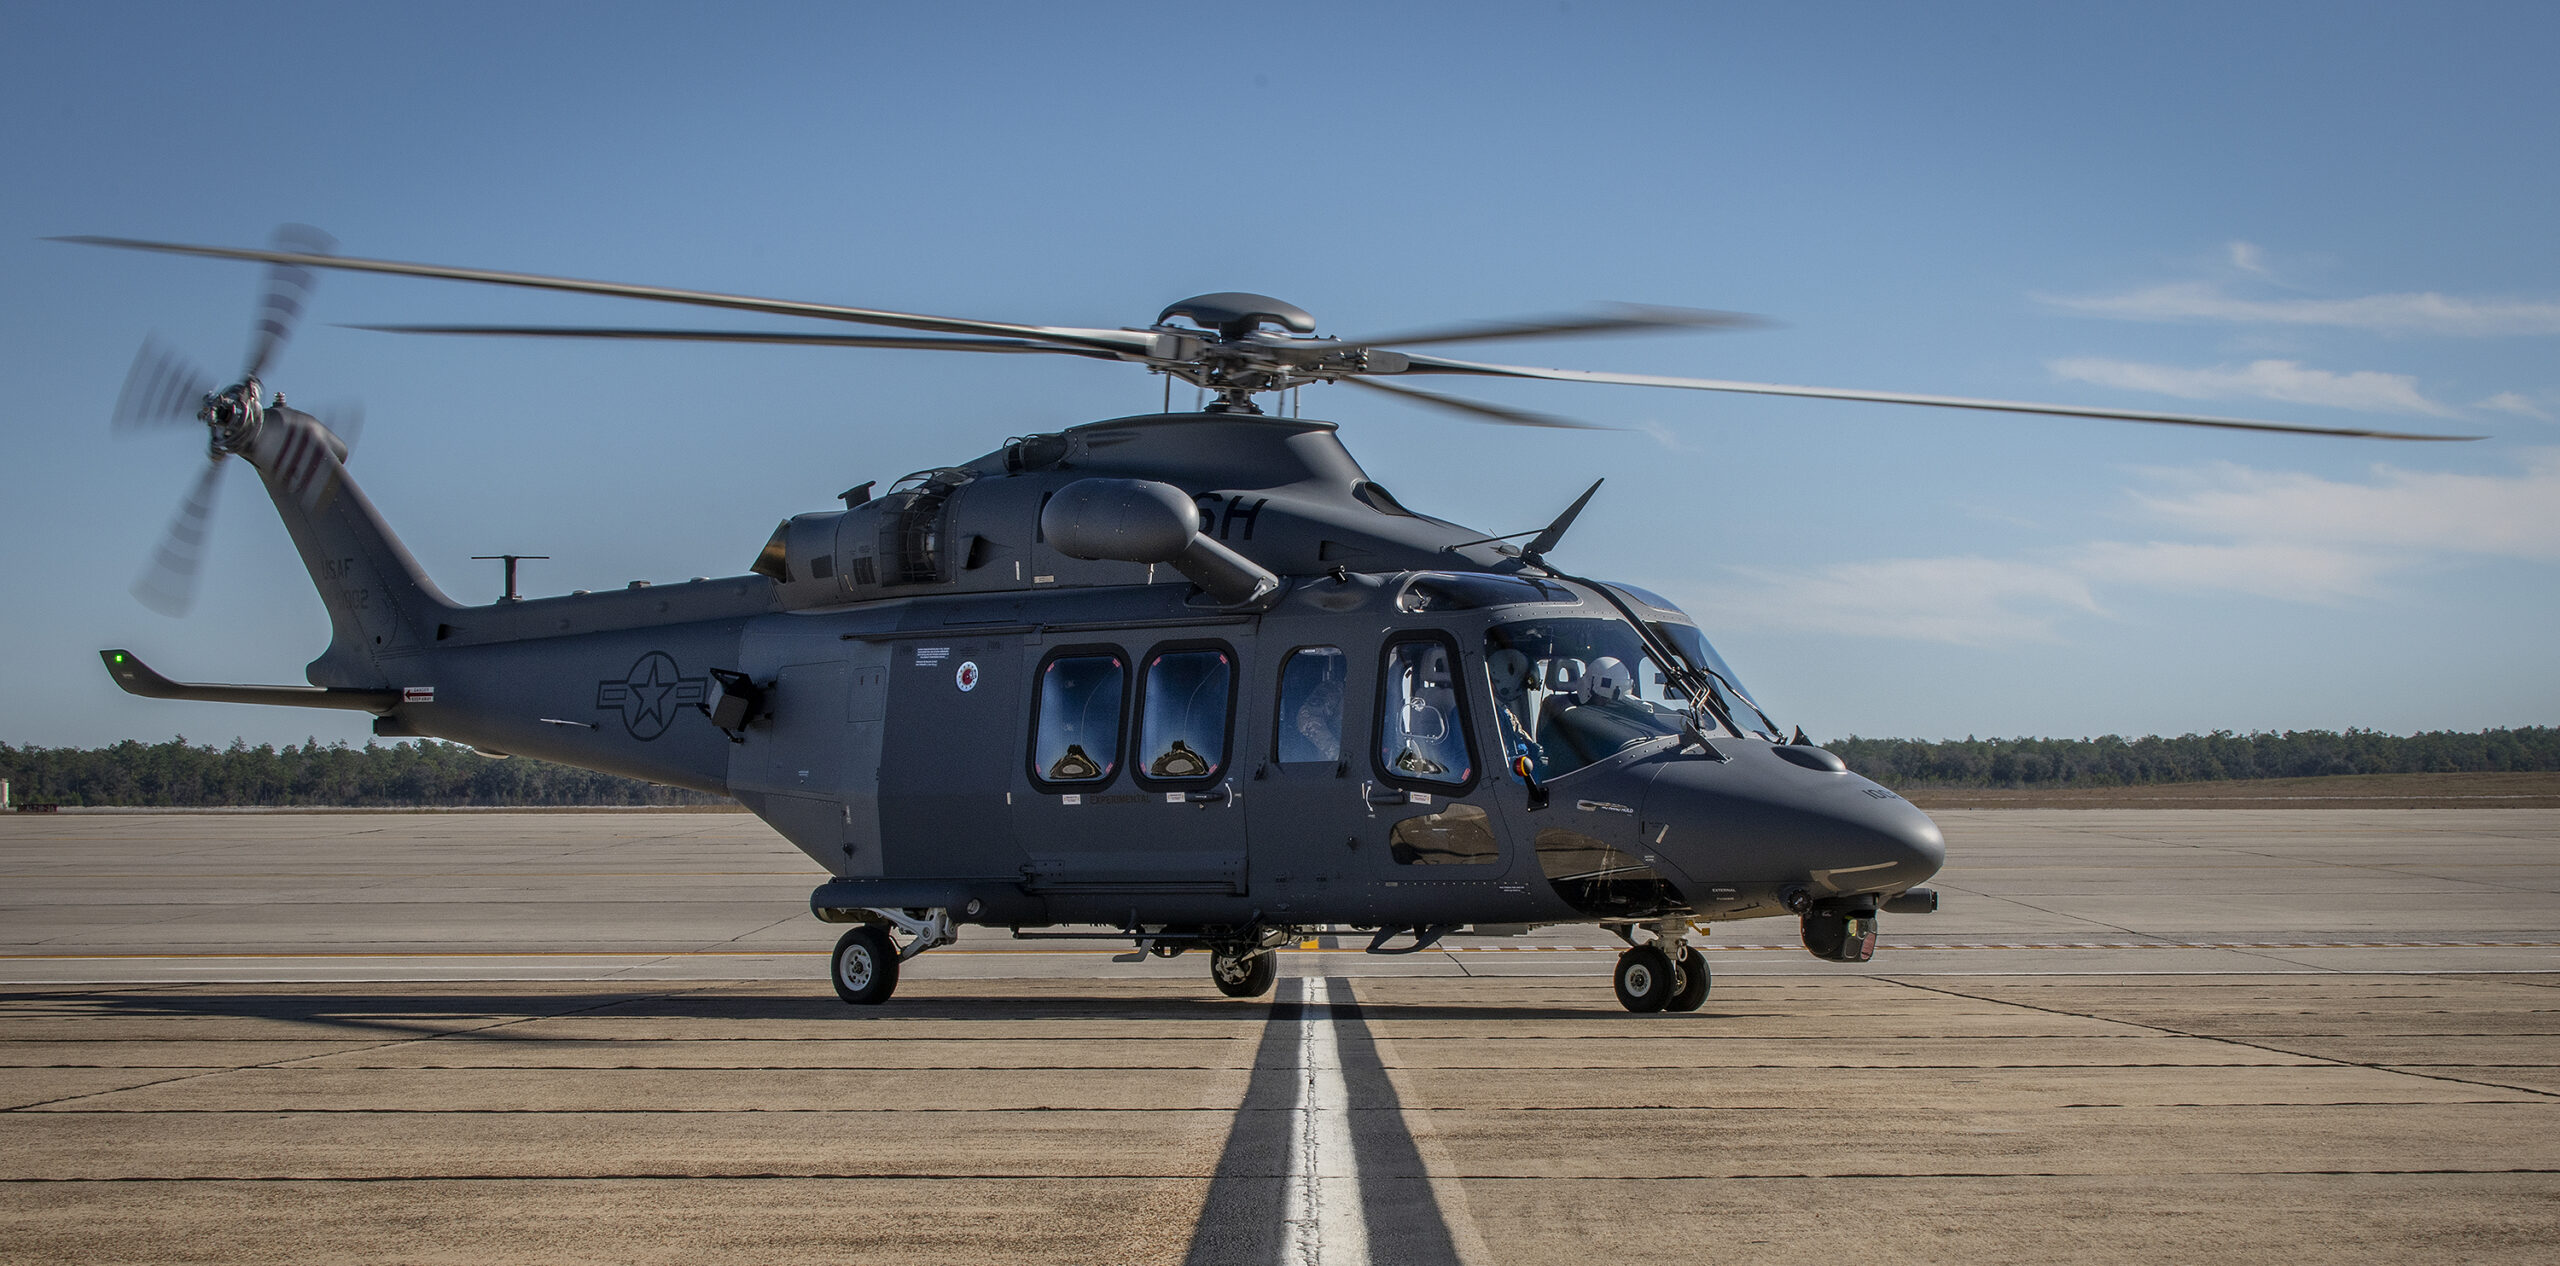 The MH-139A Grey Wolf was unveiled and named during the ceremony at Duke Field, Fla., Dec. 19, 2019. (U.S Air Force photo/Samuel King Jr.)